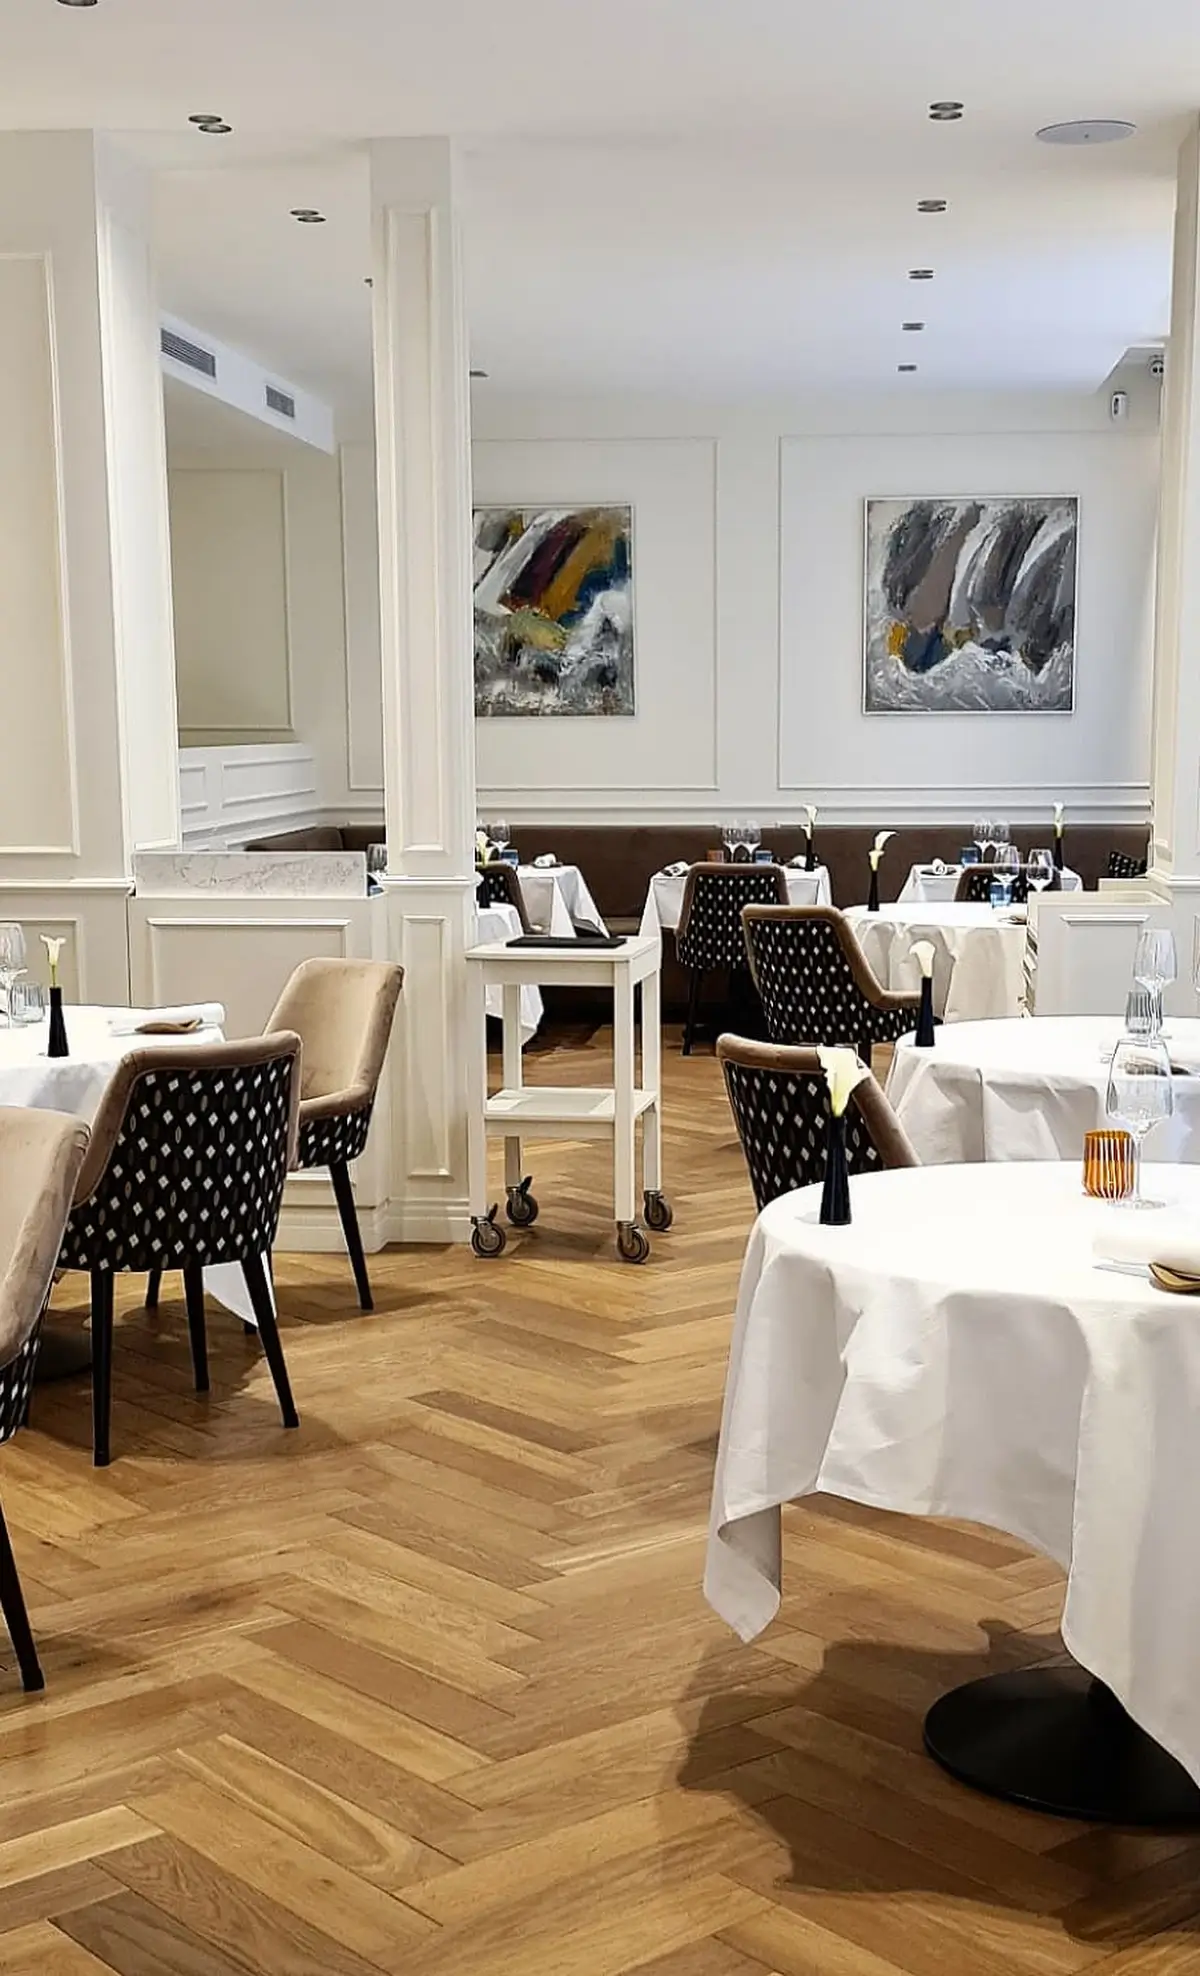 The elegant interior of Restaurant Frederic Simonin, an affordable Michelin star restaurant in Paris, featuring white tablecloths, patterned chairs, and modern art on the walls.